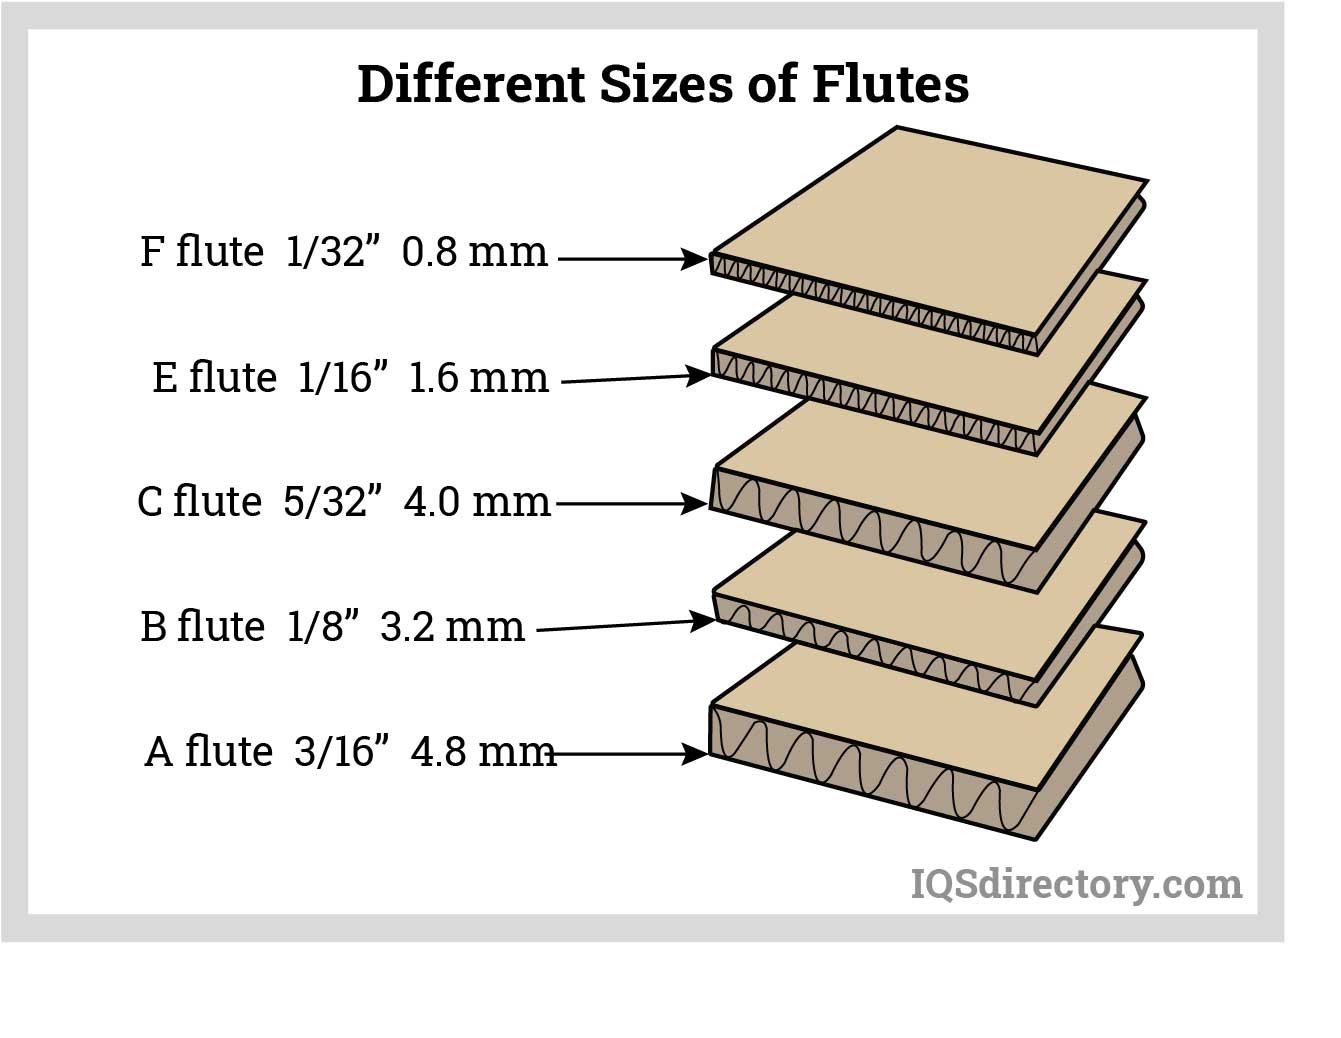 Different Sizes of Flutes